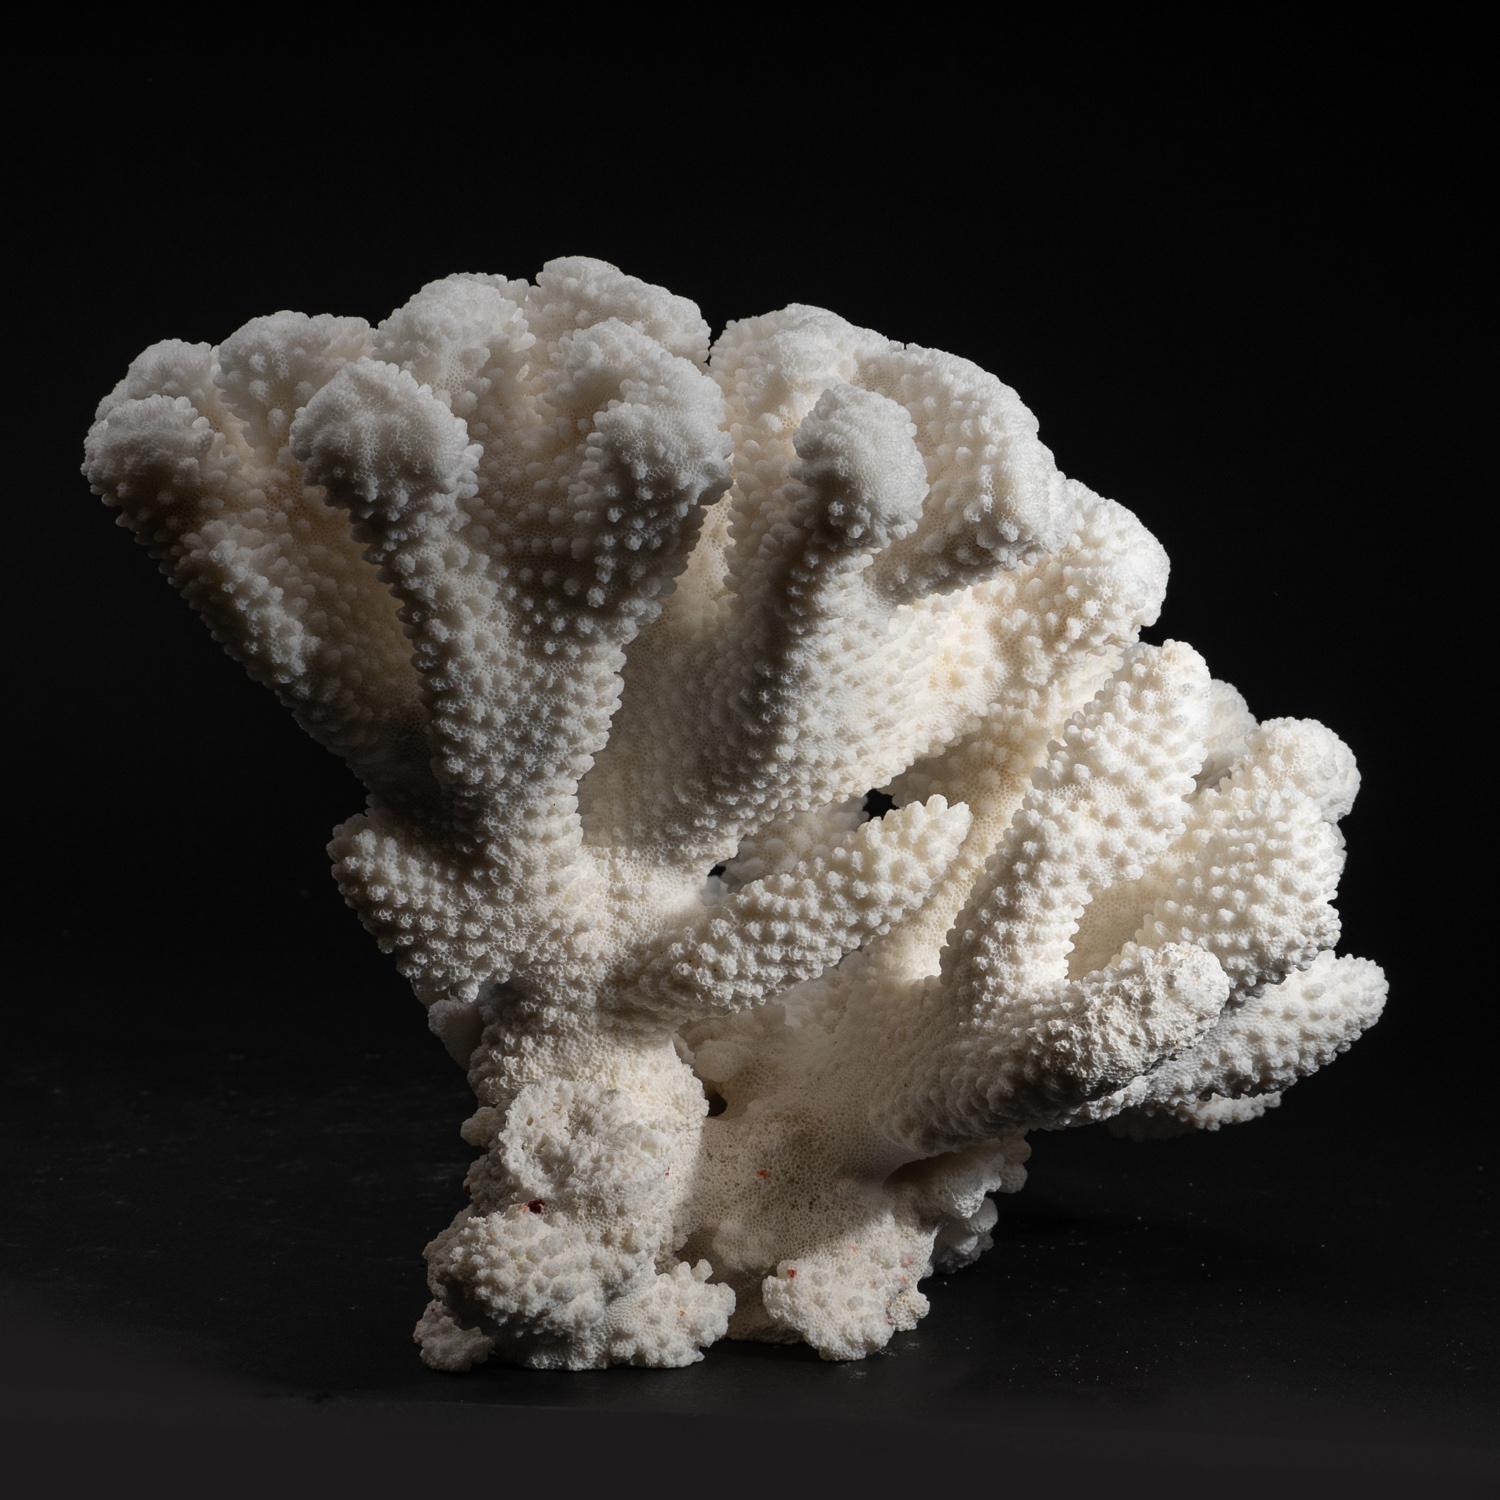 The Stylophora Coral is a small polyp stony coral commonly referred to as Cat's Paw, Club Finger, Cluster, Brush, or Bird's Nest Coral. It has rounded branches with blunt ends that differentiate it from other closely related SPS corals.

 Weight: